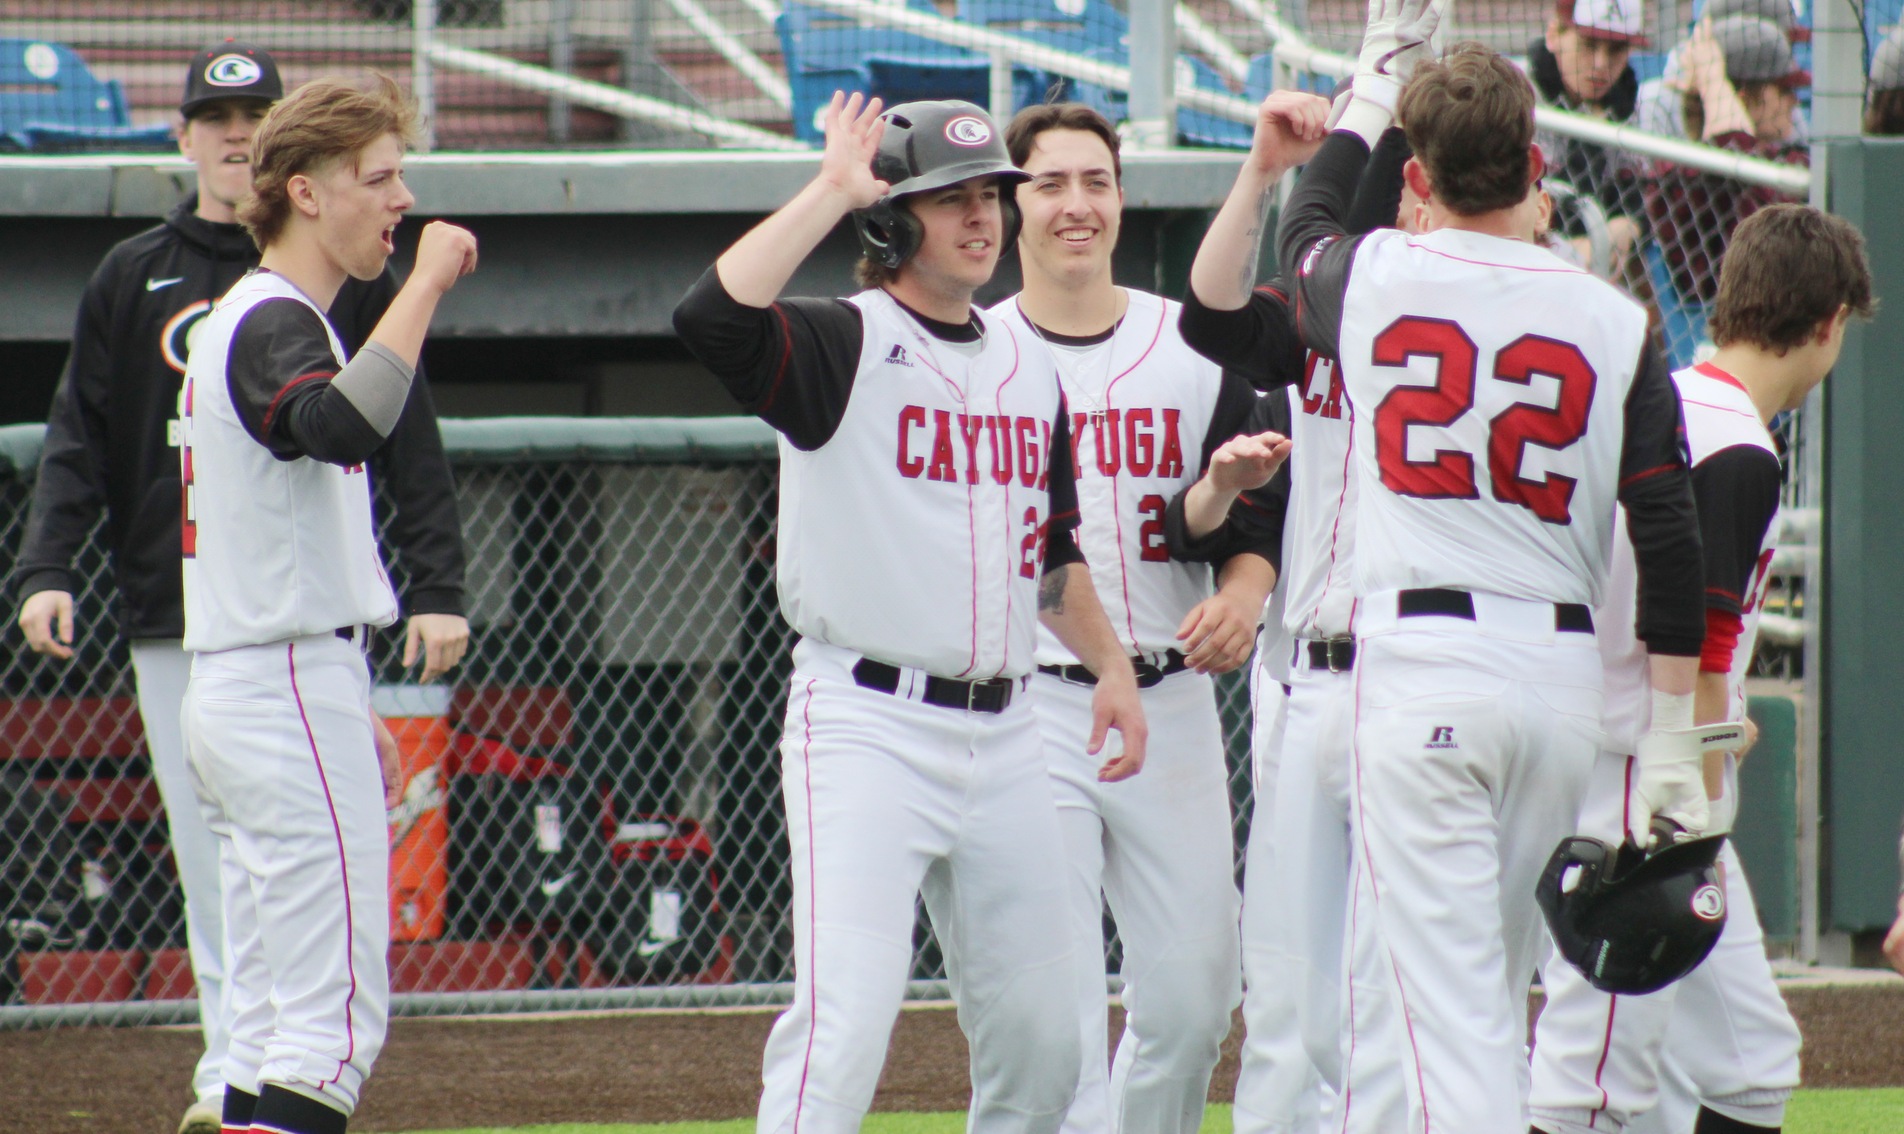 Cayuga's baseball team celebrates during its first game at Falcon Park in Auburn.